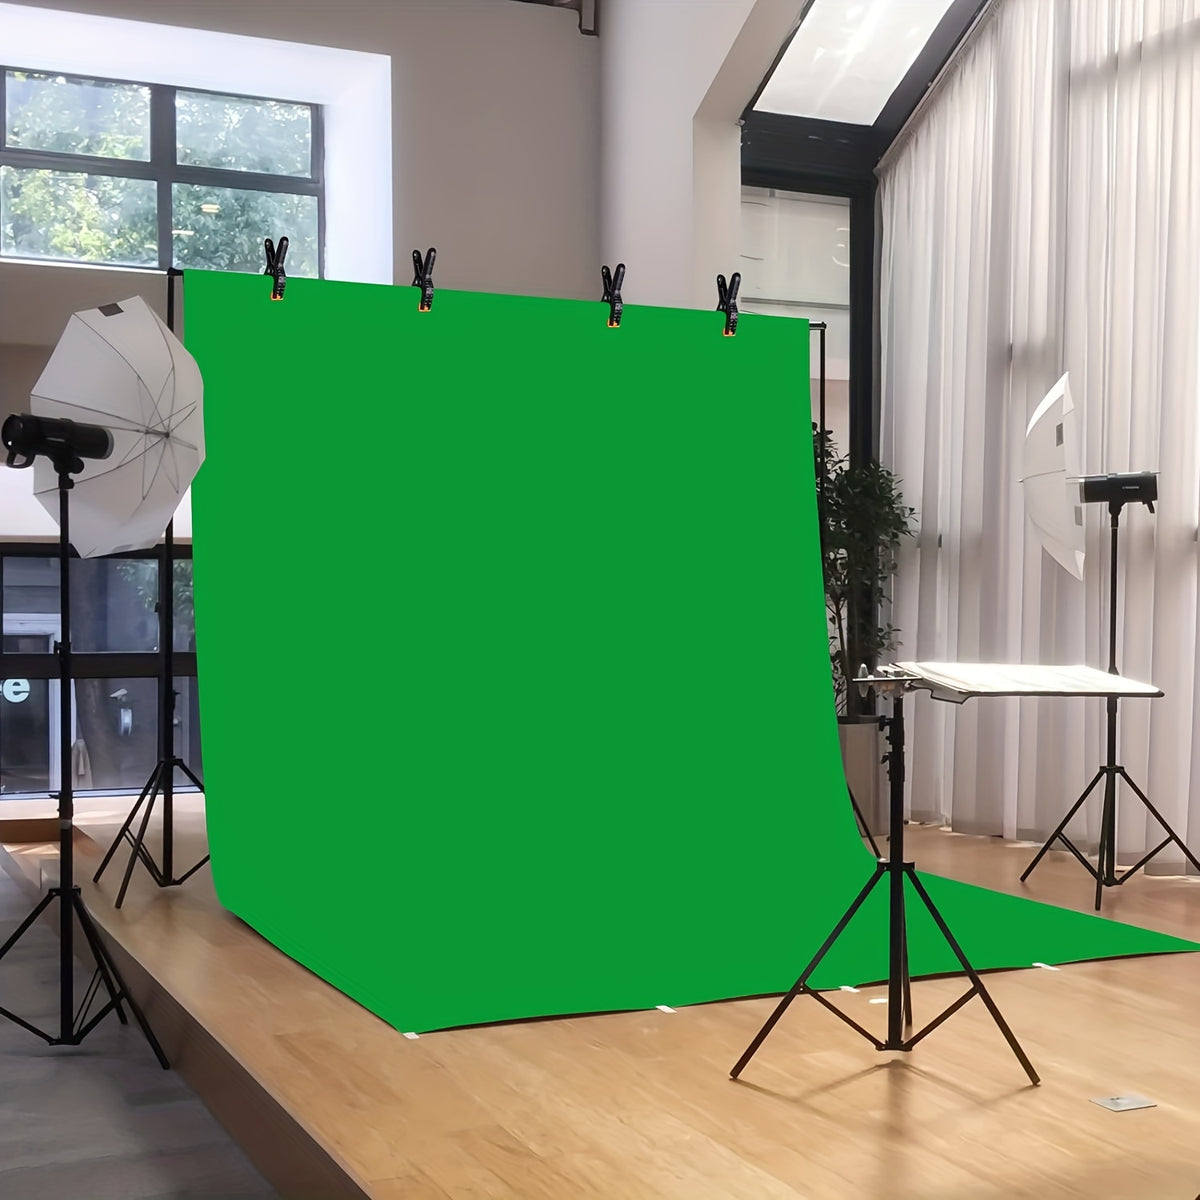 a green screen is set up in a room